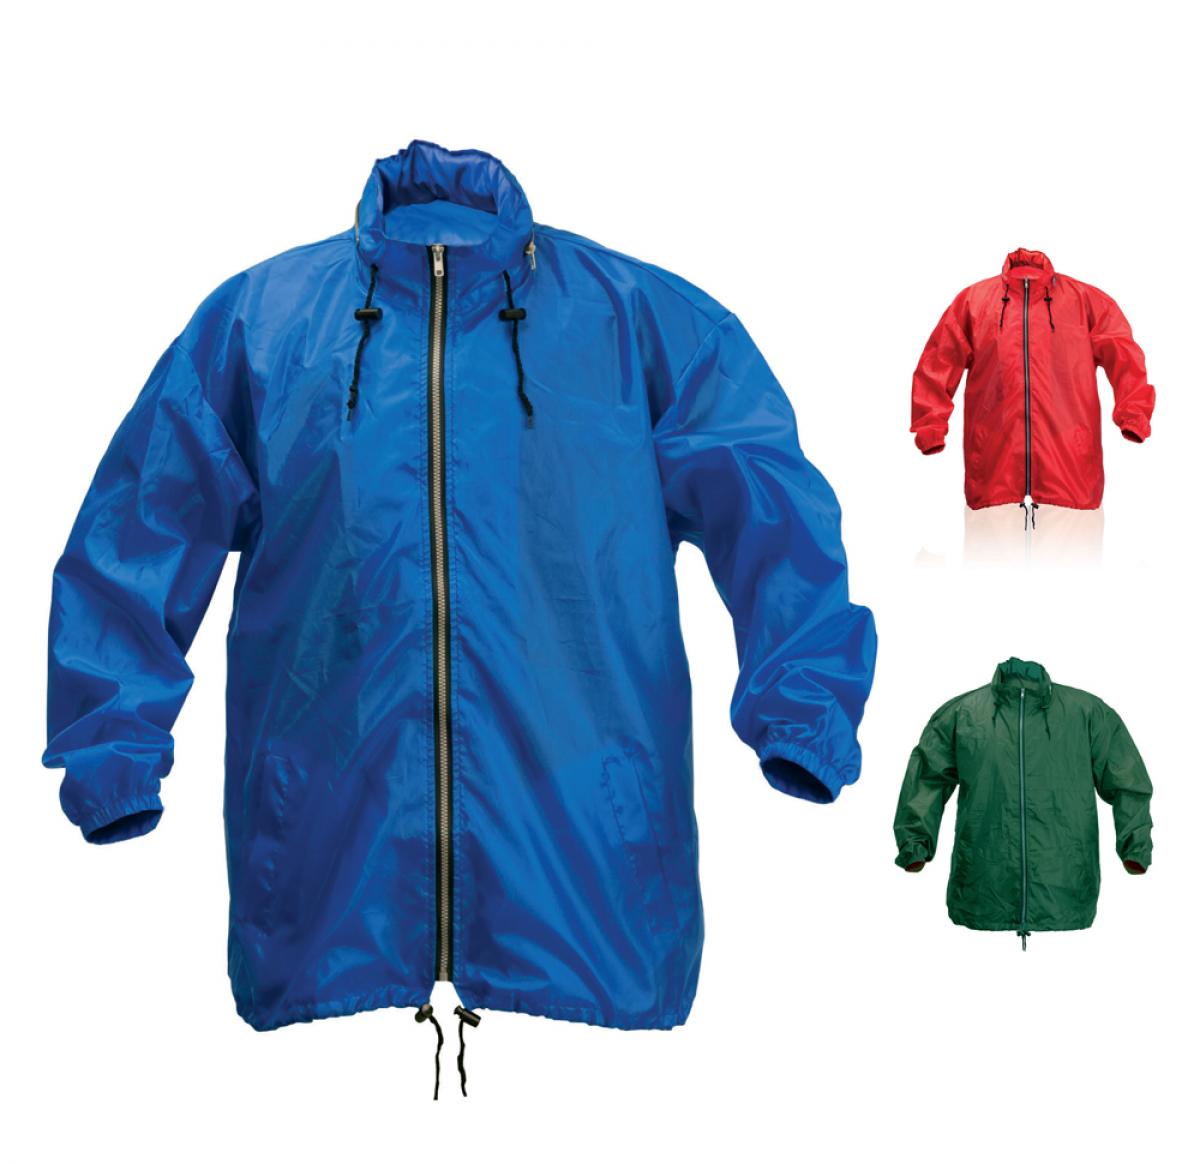 Polyester Raincoat Zipped - Buy Promotional Products UK | Branded ...